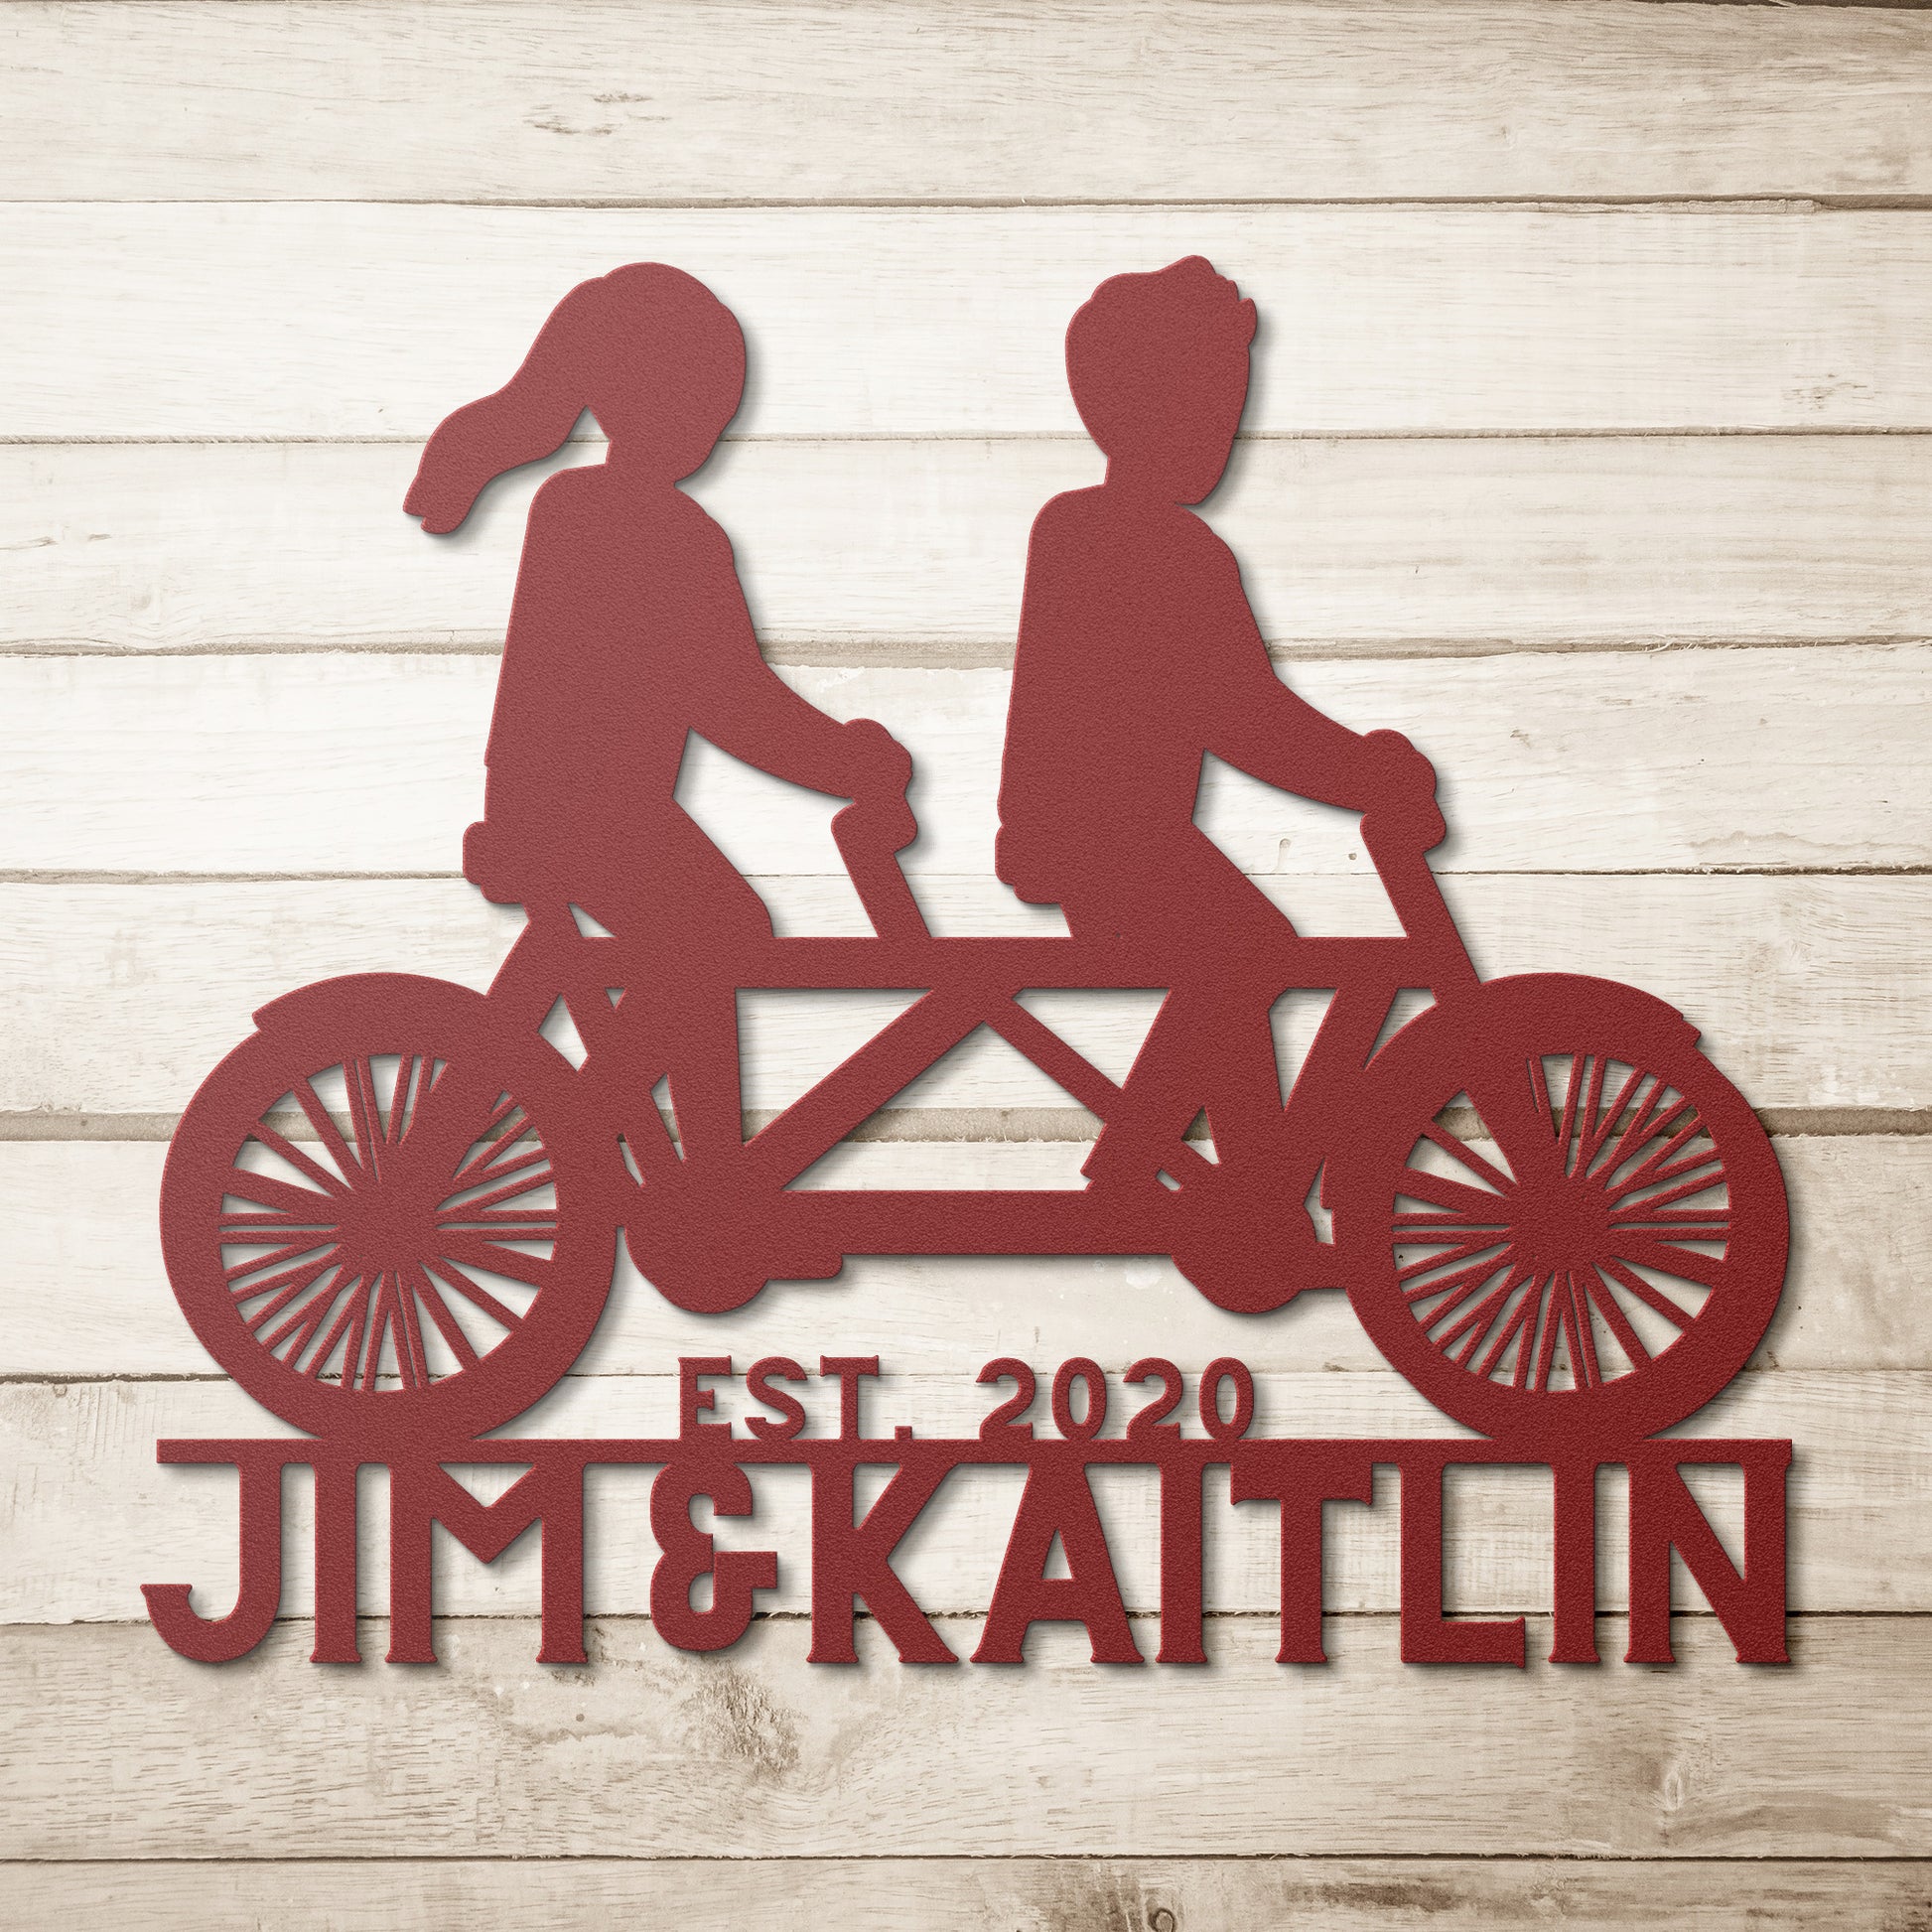 Jim and Katie riding a teelaunch Couple Cycle on Tandem Bike Metal Wall Art for home decor.